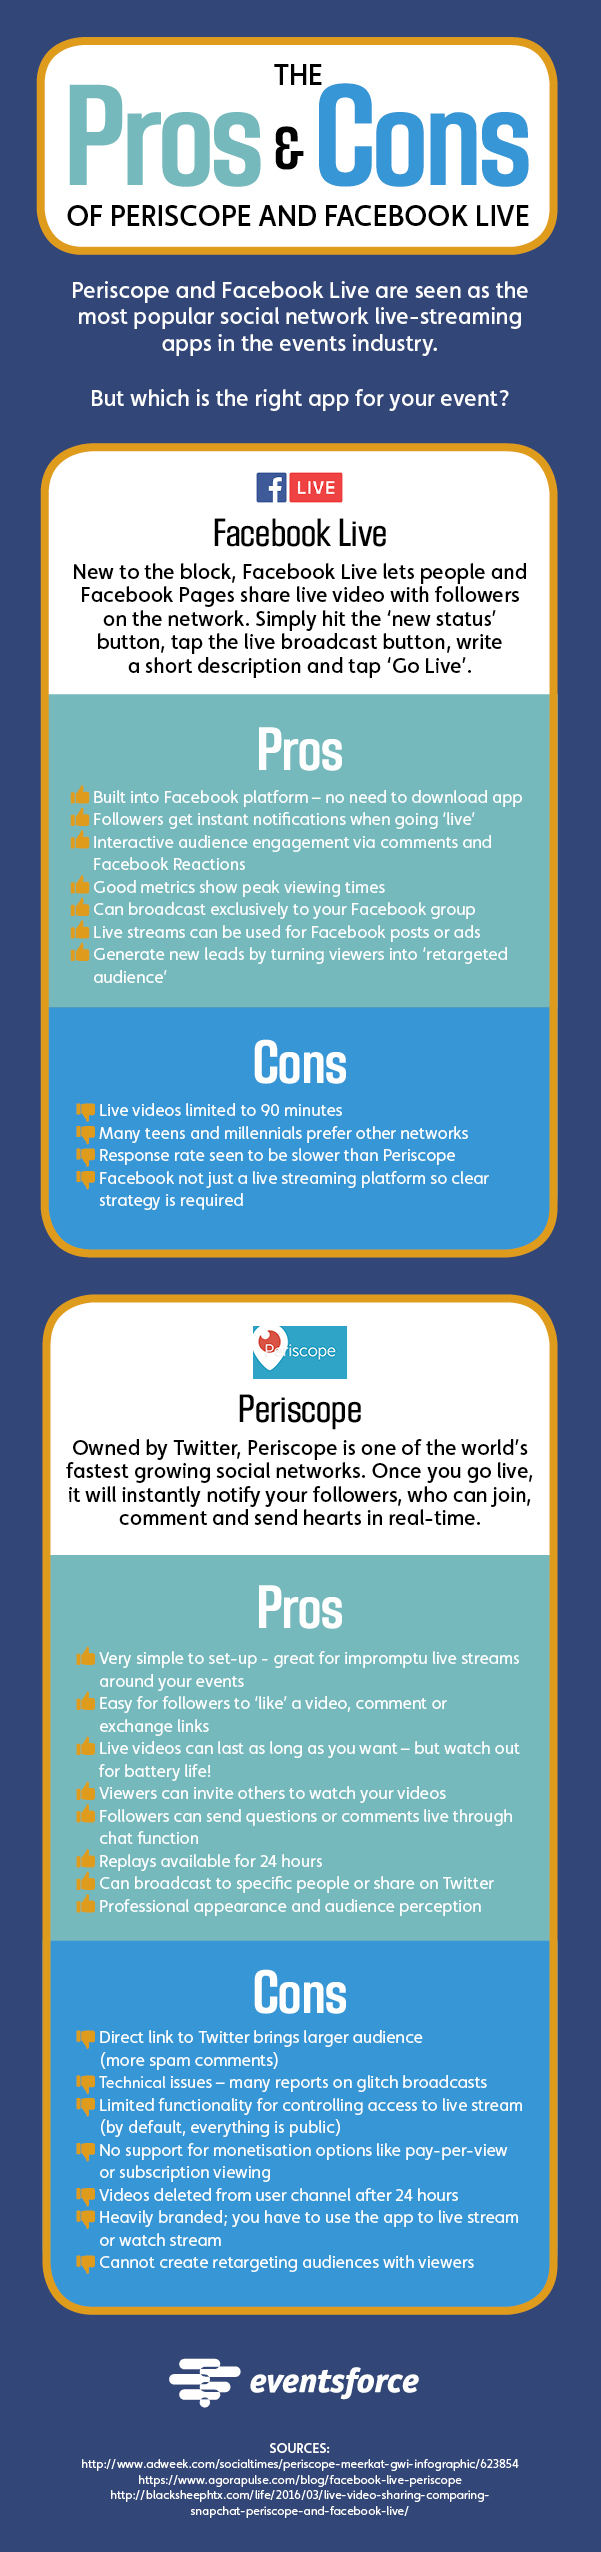 pros and cons of facebook live infographic